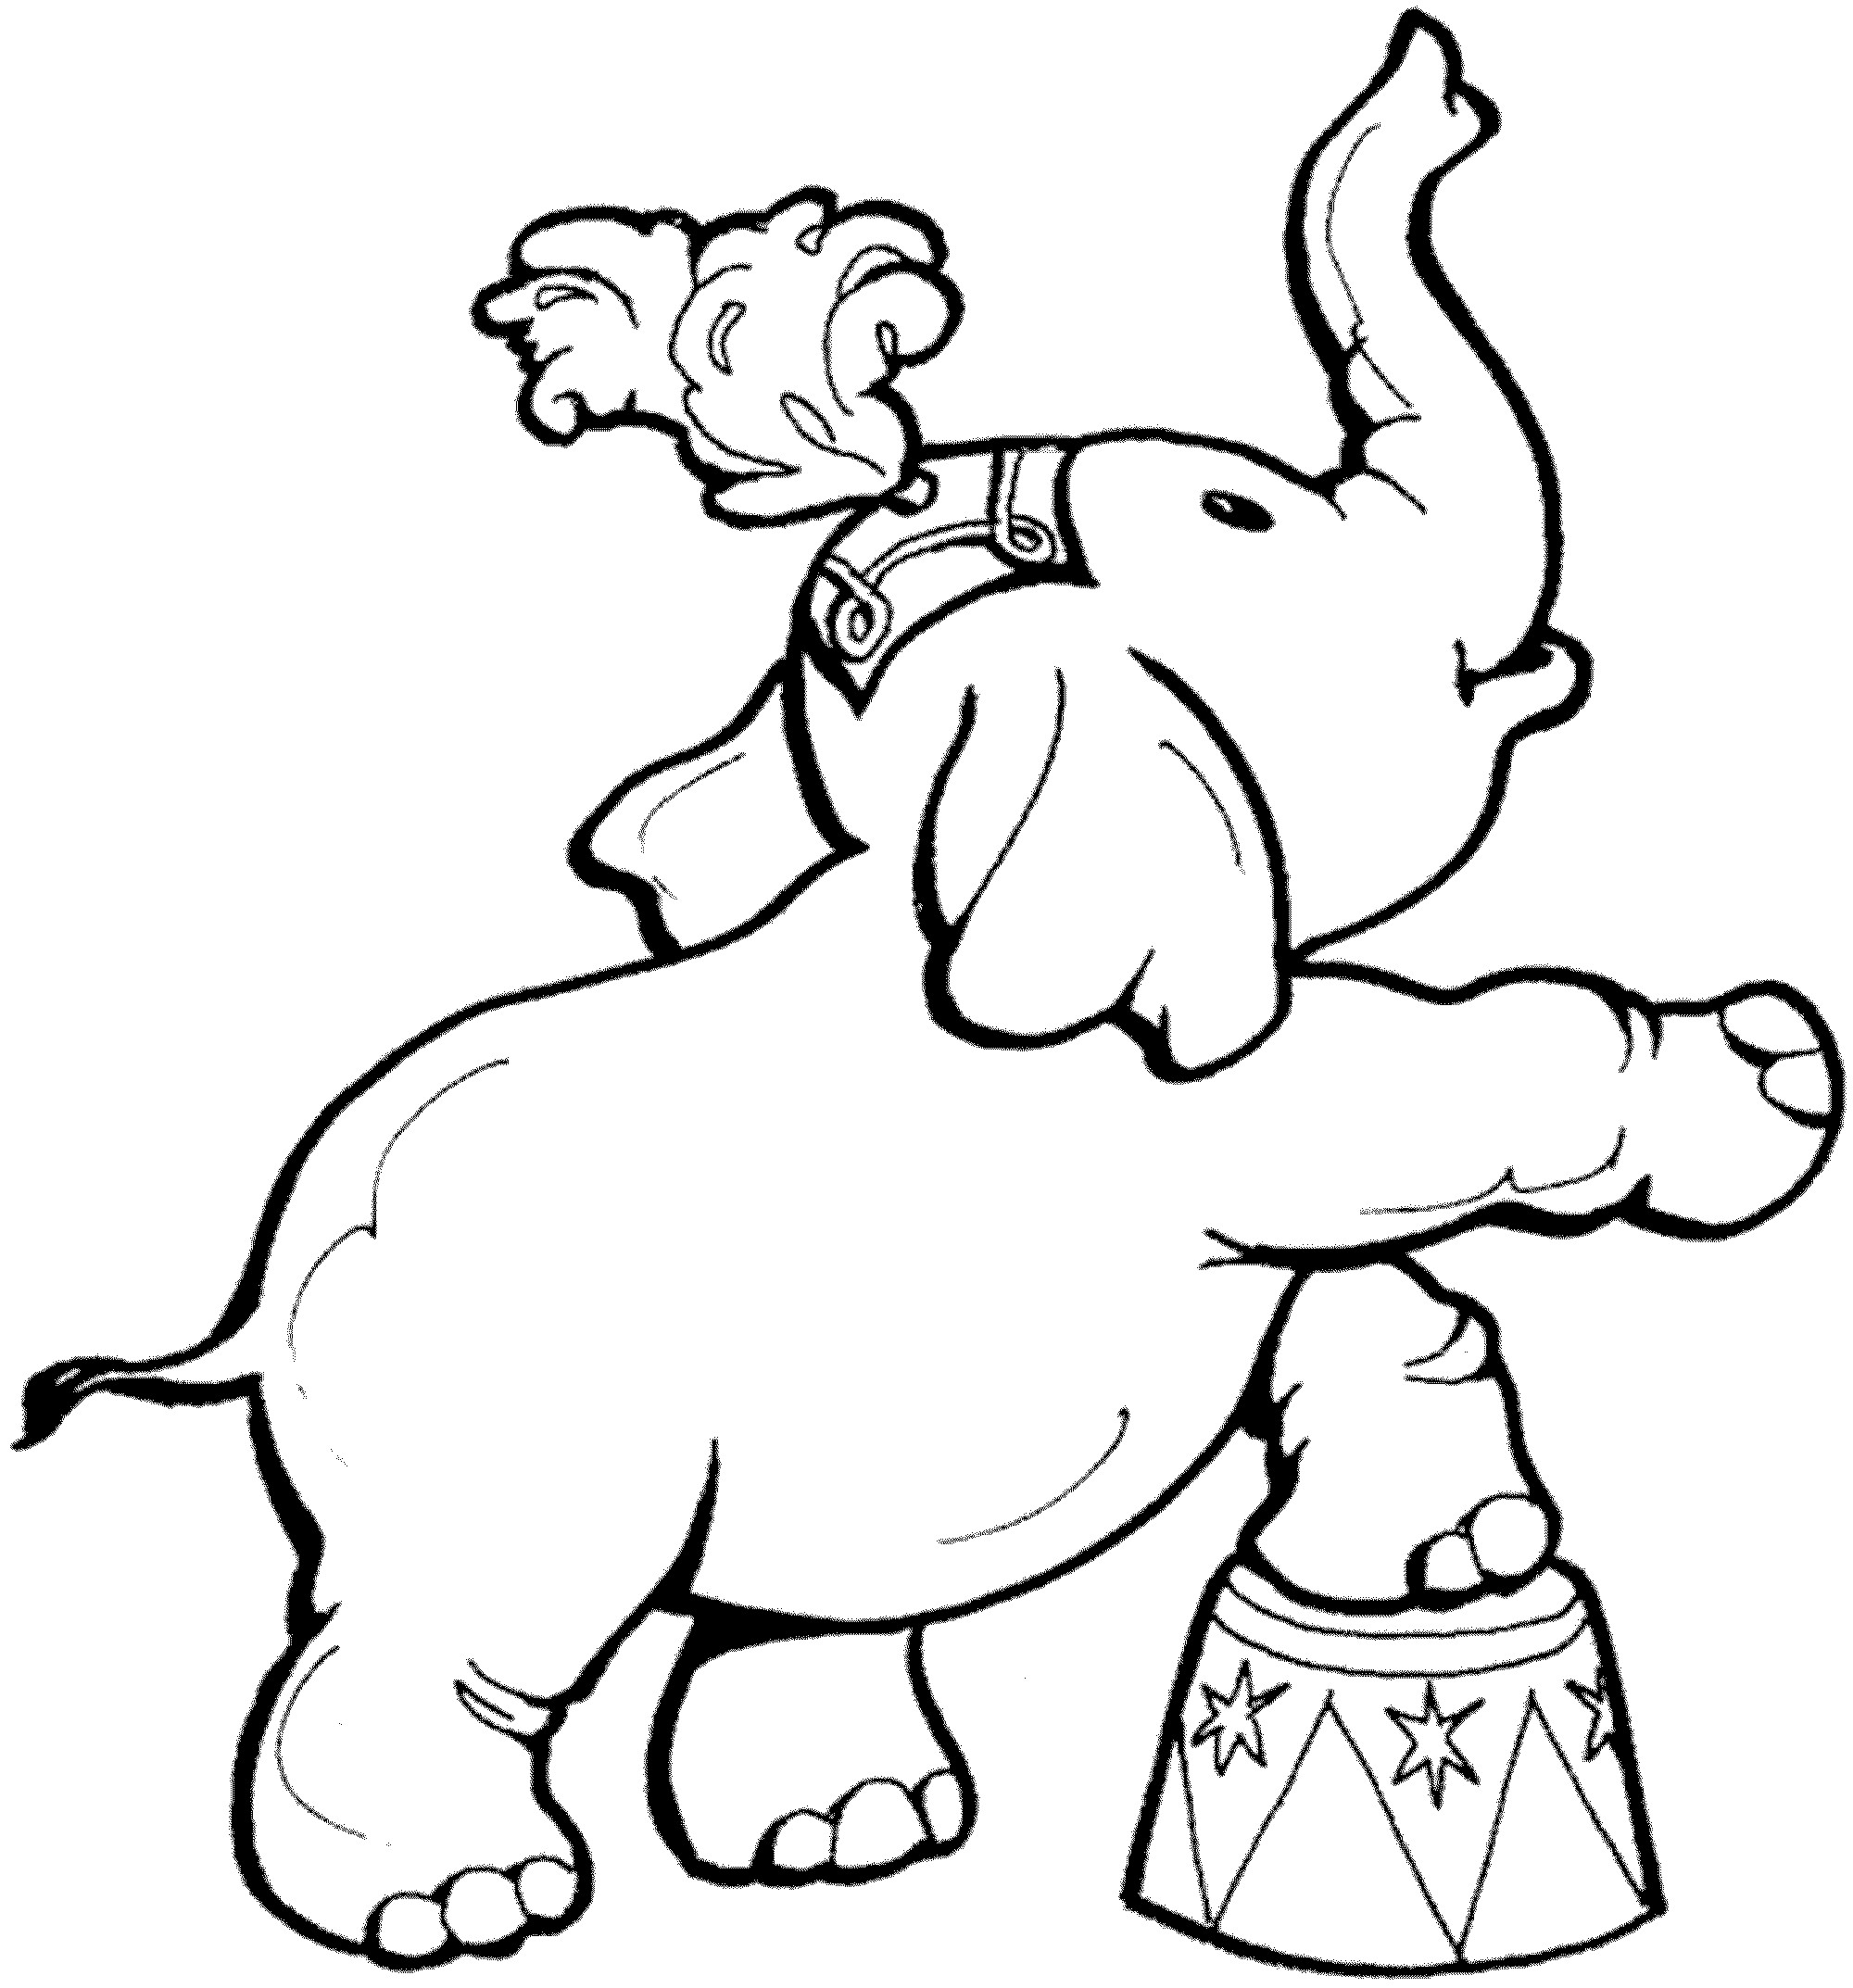 Elephant Coloring Sheet
 coloring page elephant